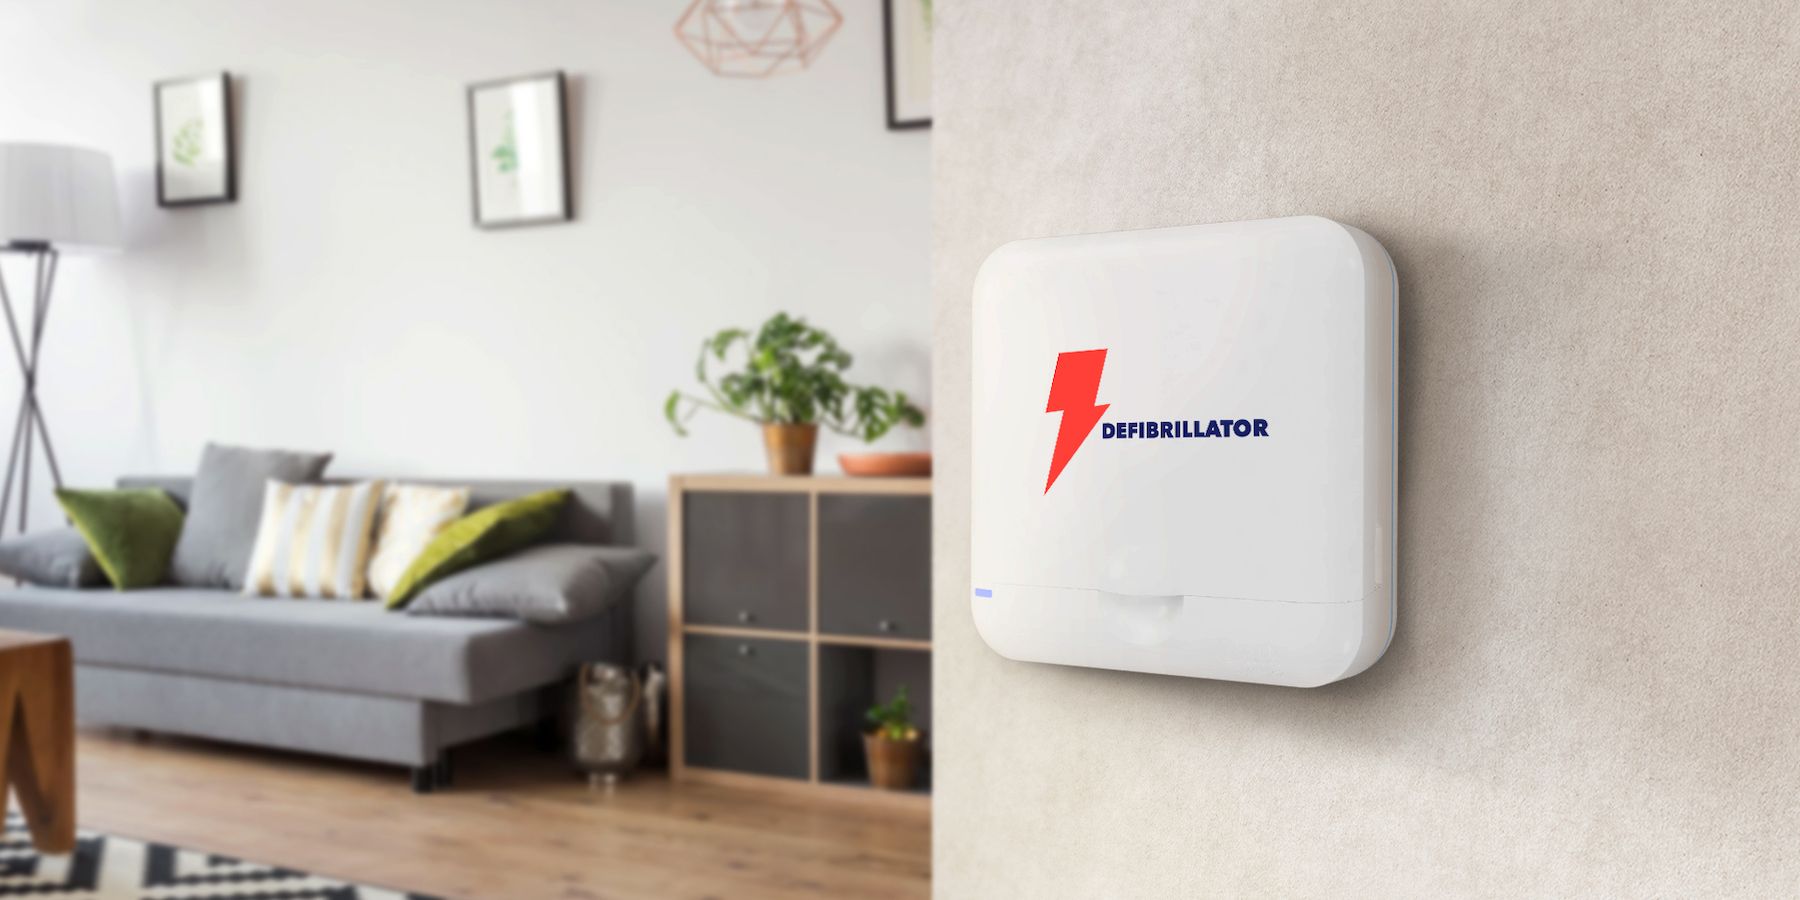 The Lifeaz defibrillator mounted on a wall inside a home